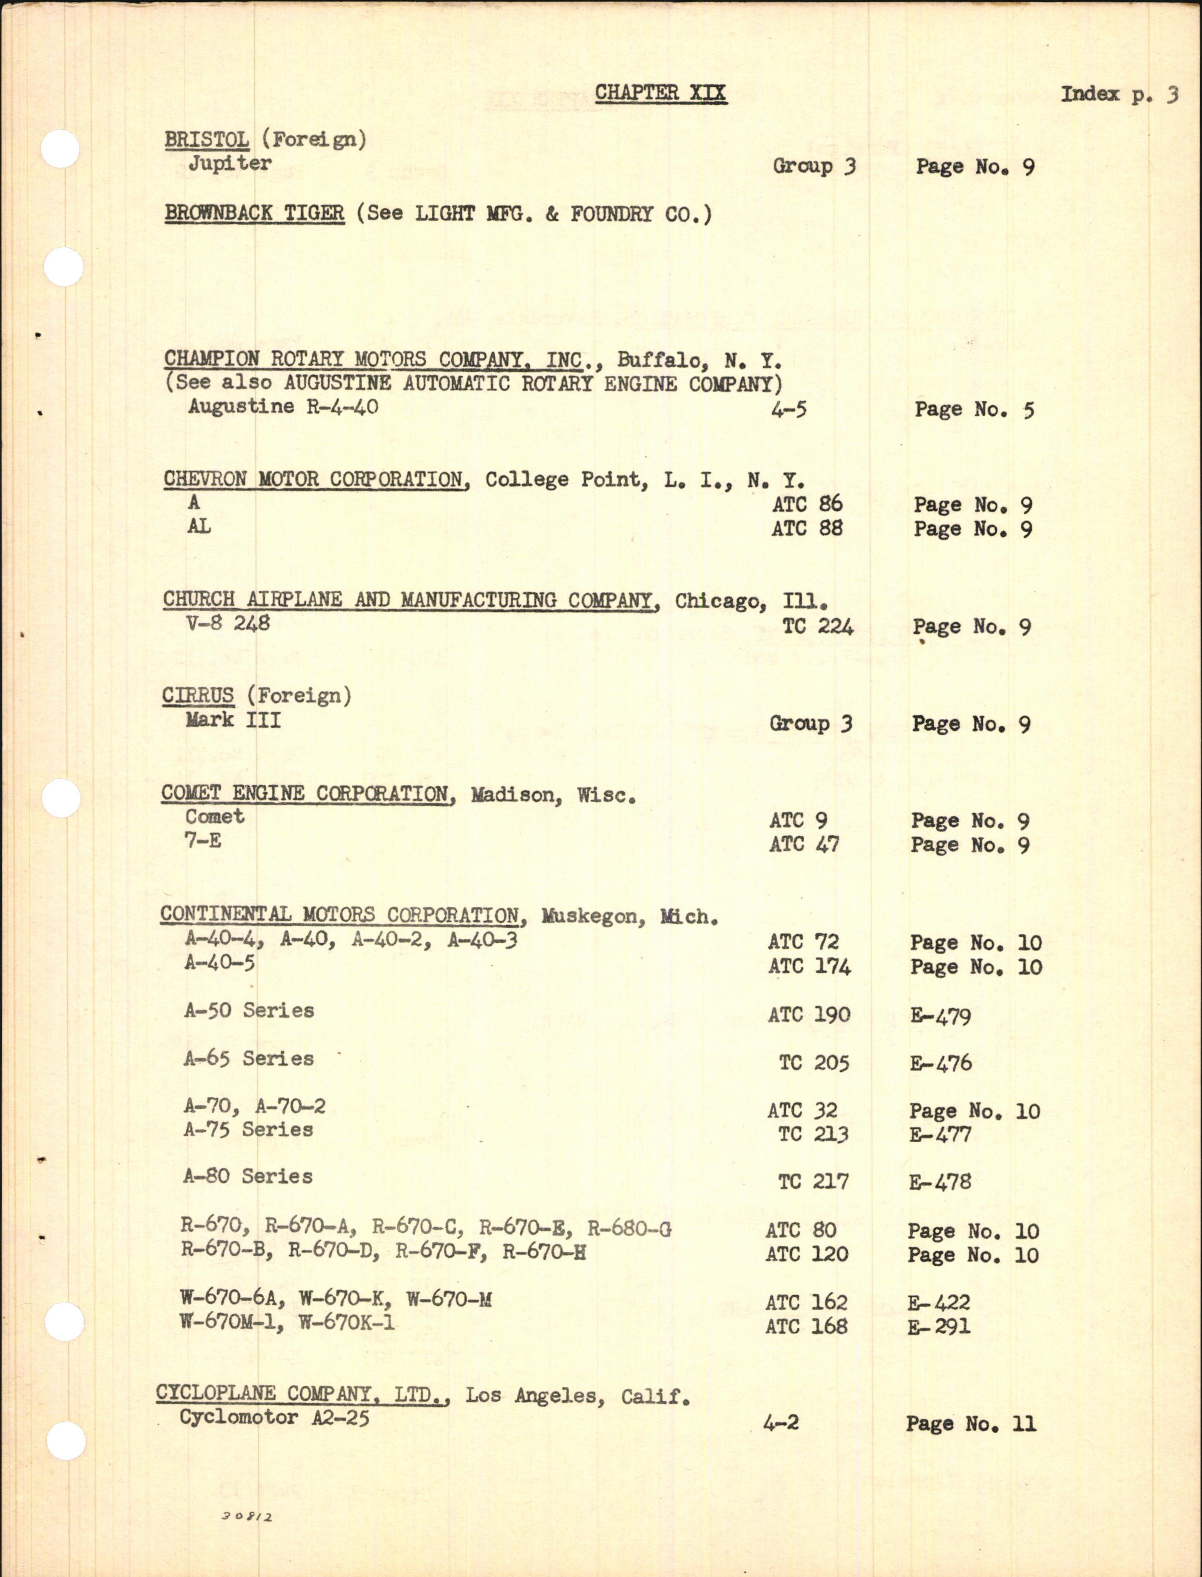 Sample page 14 from AirCorps Library document: Inspection Handbook for Aircraft Engines